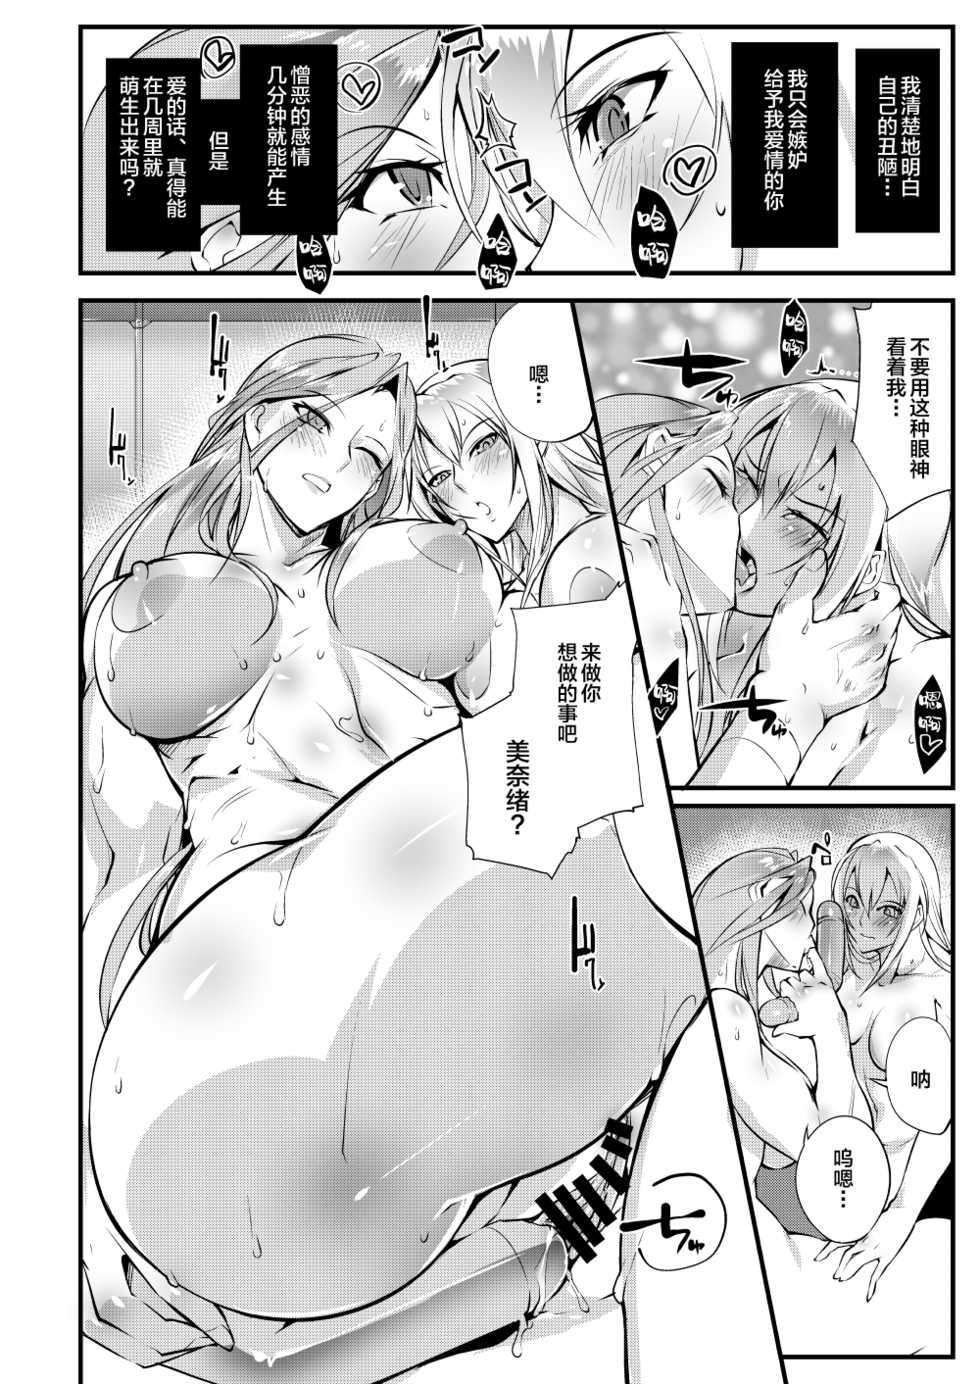 [TLG (bowalia)] Stand on Lightning 1 [Chinese] [新桥月白日语社] - Page 7